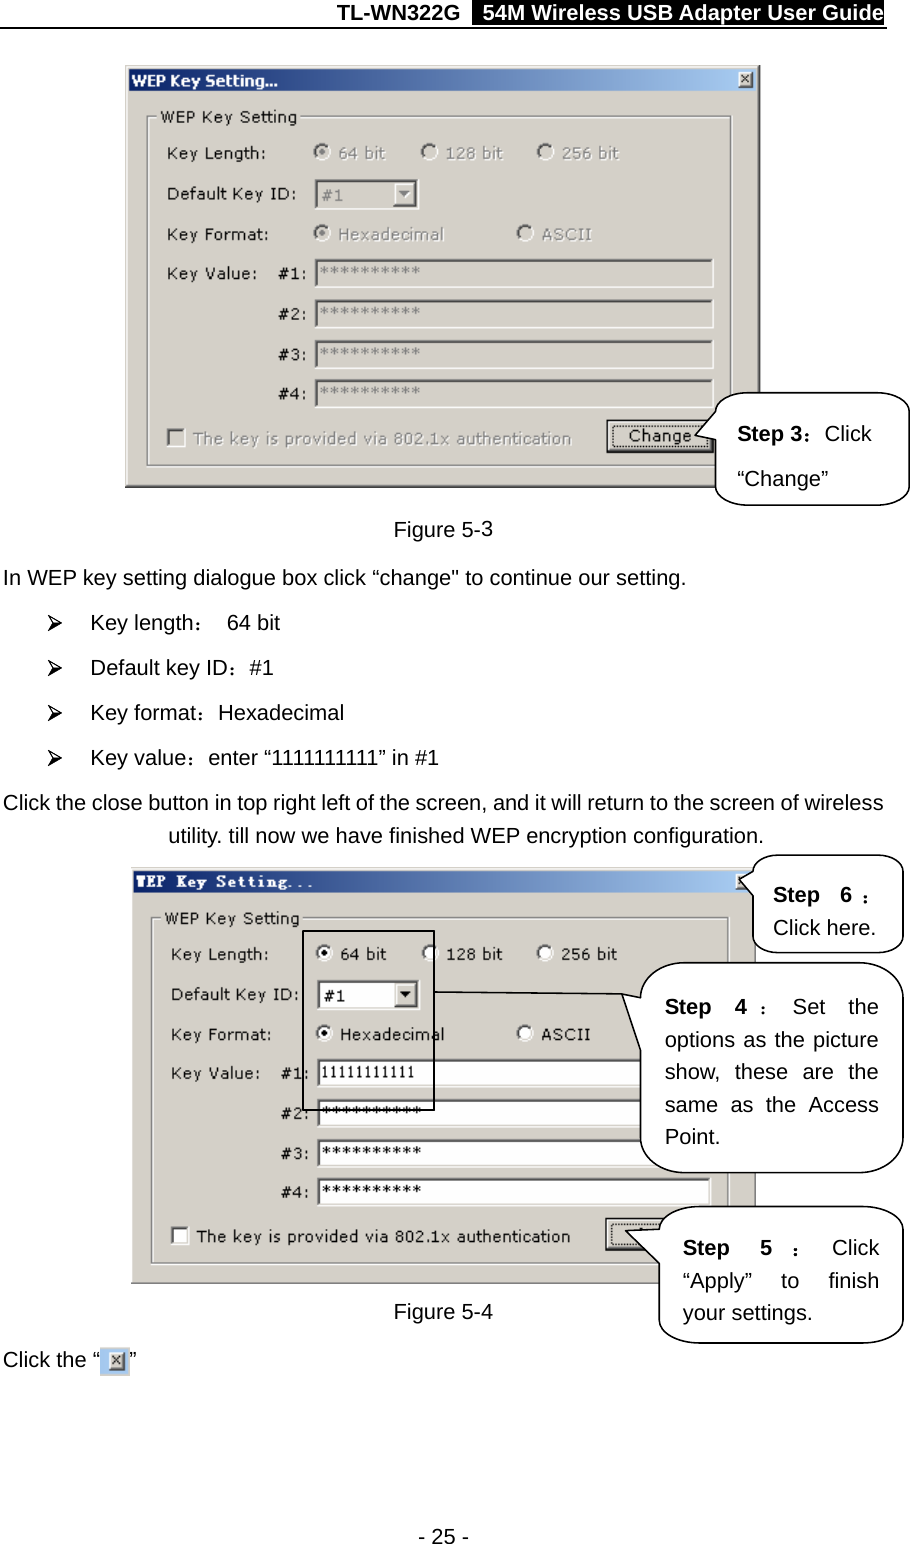 TL-WN322G    54M Wireless USB Adapter User Guide  Step 3：Click “Change” Figure 5-3 In WEP key setting dialogue box click “change&quot; to continue our setting.   ¾ Key length： 64 bit ¾ Default key ID：#1 ¾ Key format：Hexadecimal ¾ Key value：enter “1111111111” in #1 Click the close button in top right left of the screen, and it will return to the screen of wireless utility. till now we have finished WEP encryption configuration.    Step 4 ：Set the options as the picture show, these are the same as the Access Point. Step 6 ：Click here. Step 5 ：Click “Apply” to finish your settings. Figure 5-4 Click the “ ” - 25 - 